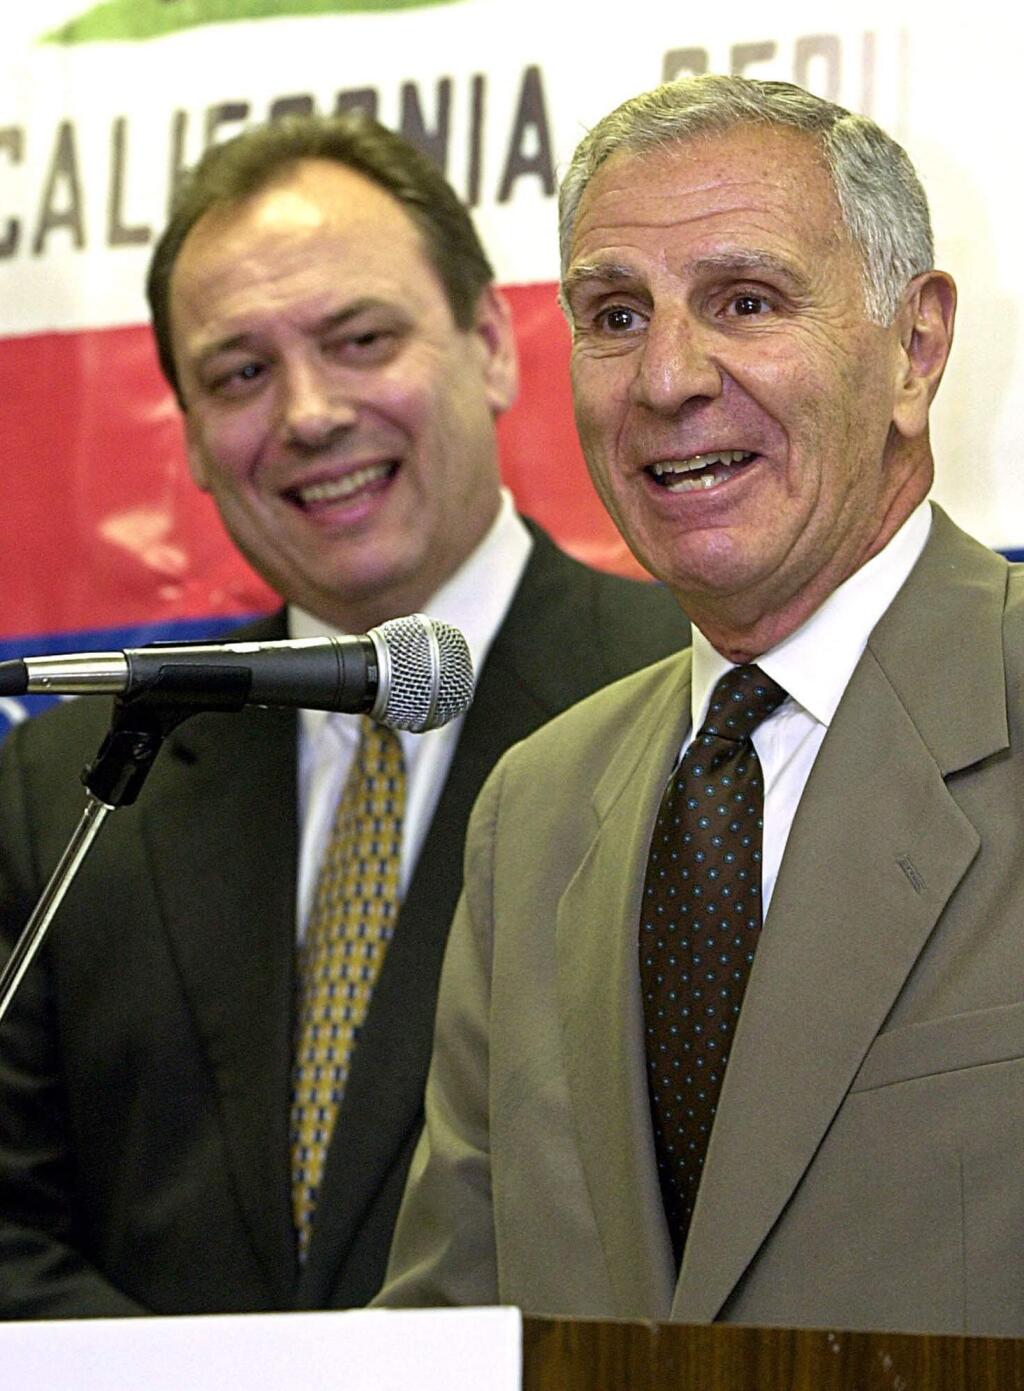 FILE -- In this June 20, 2001 file photo, Republican gubernatorial candidate, Secretary of State Bill Jones, left, looks on as former California Gov. George Deukmejian answers questions during a news conference in Sacramento, Calif. A former chief of staff says two-term California governor George Deukmejian, whose anti-spending credo earned him the nickname 'The Iron Duke,' has died at age 89. Steve Merksamer says Deukmejian died Tuesday, May 8, 2018, of natural causes. (AP Photo/Rich Pedroncelli, File)